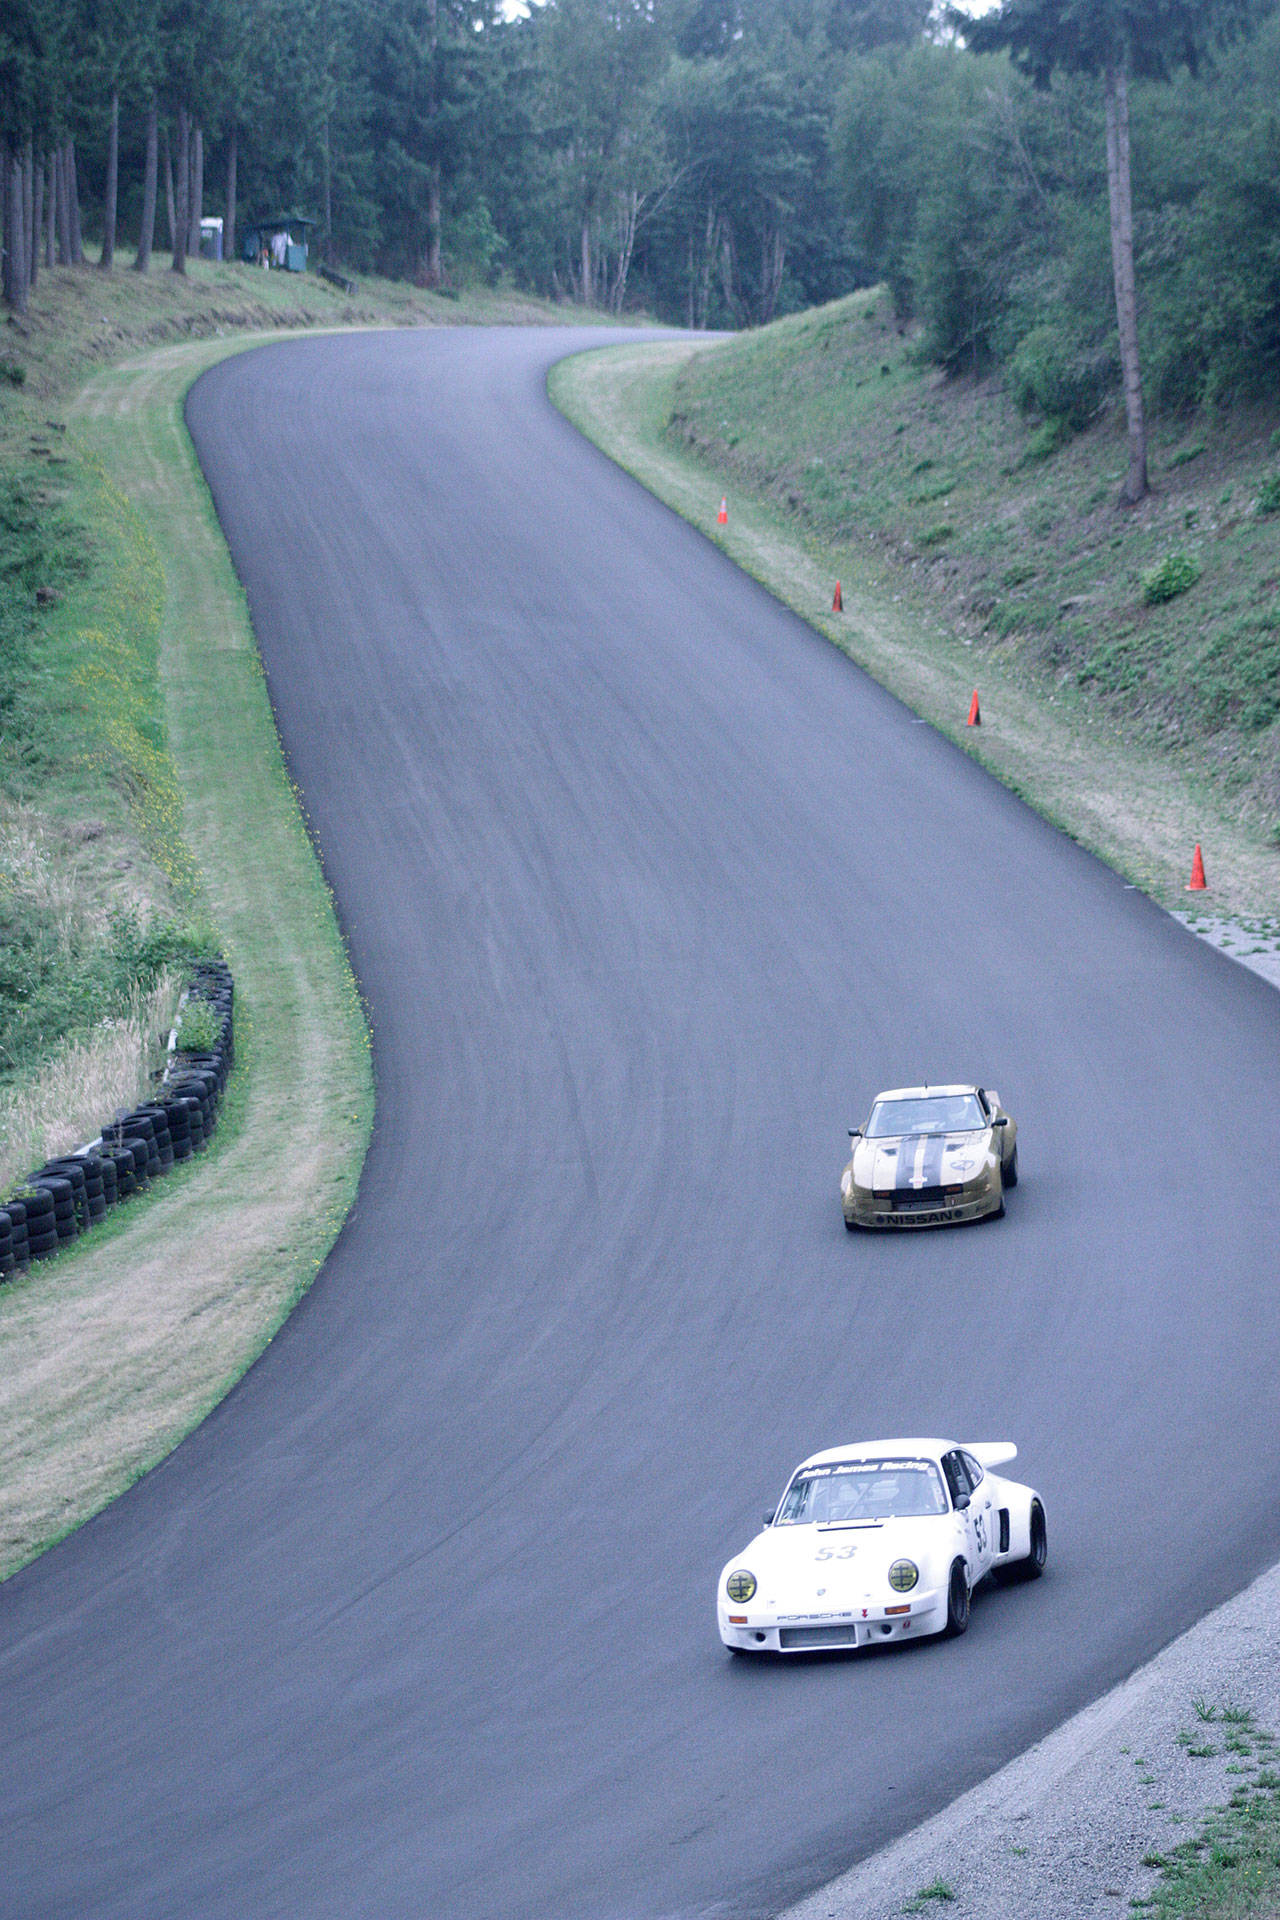 Pacific Raceways plays a part in new movie